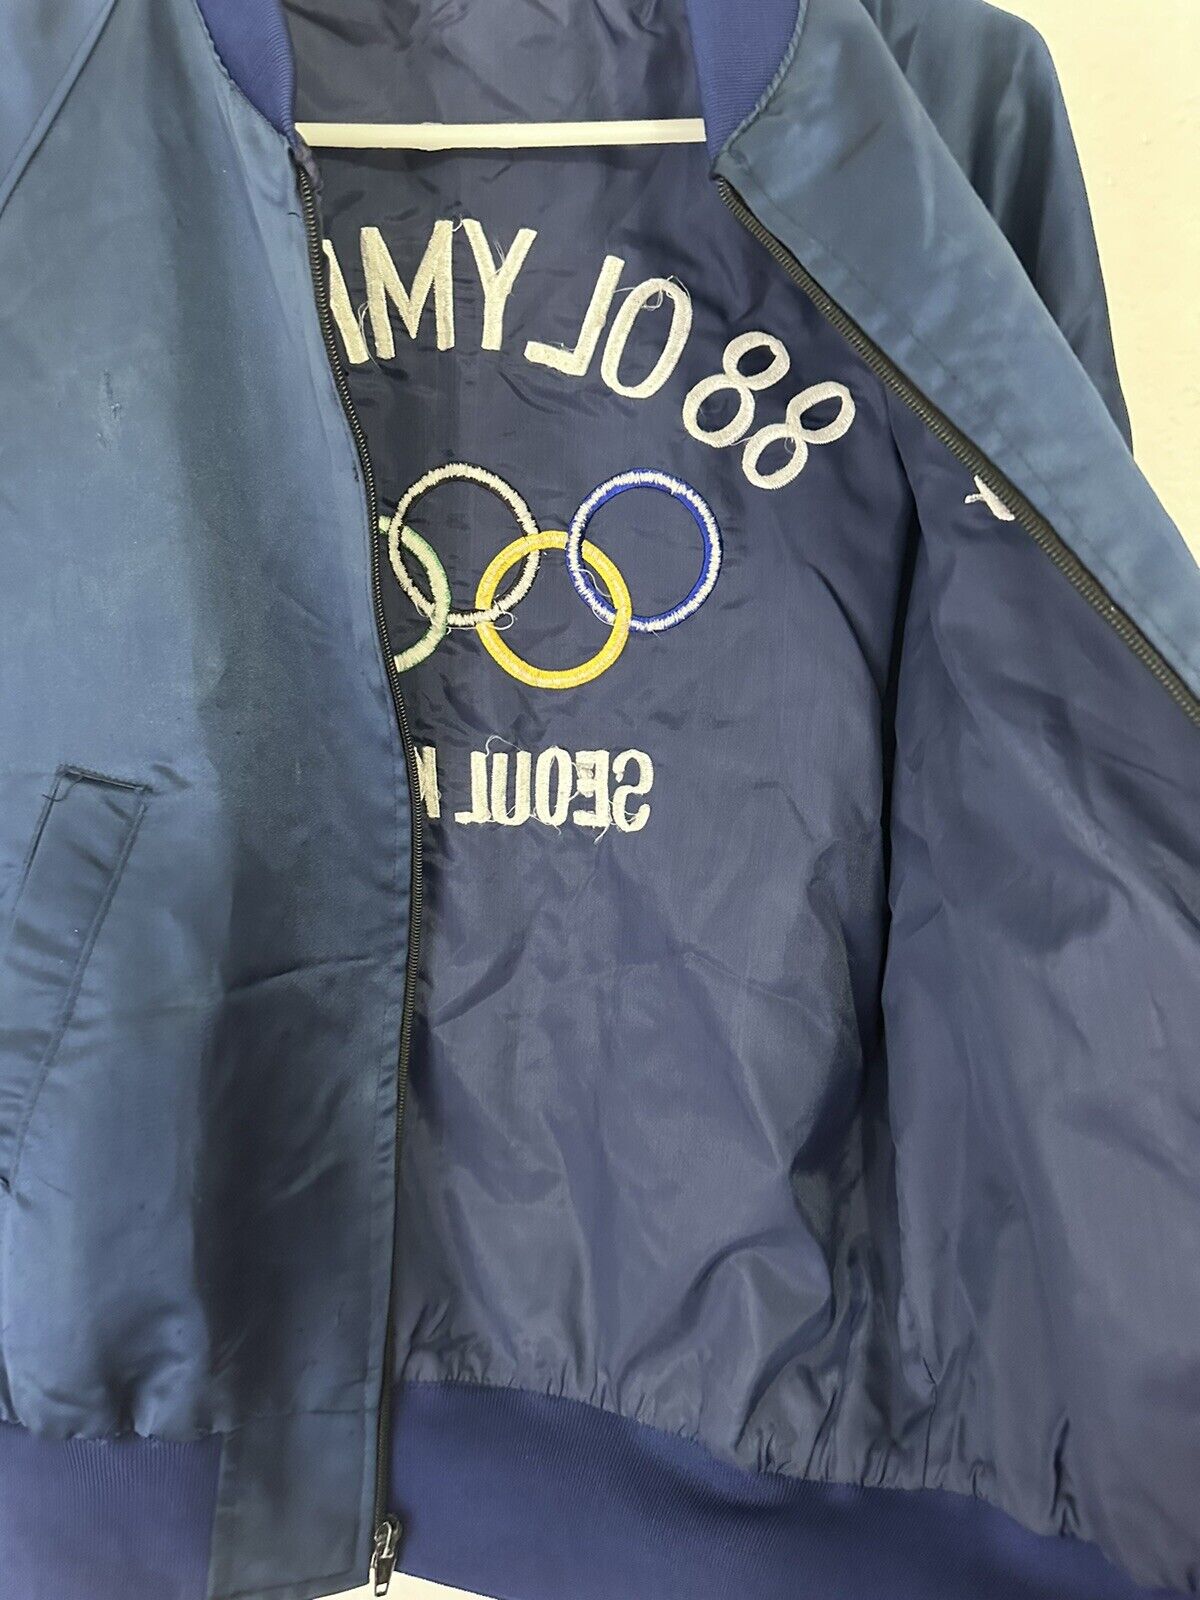 Rare Vintage 1988 Seoul Olympics Navy Bomber Jacket - Size XS, Embroidered 'Gary' - Unique Collectible Sports Memorabilia - TreasuTiques